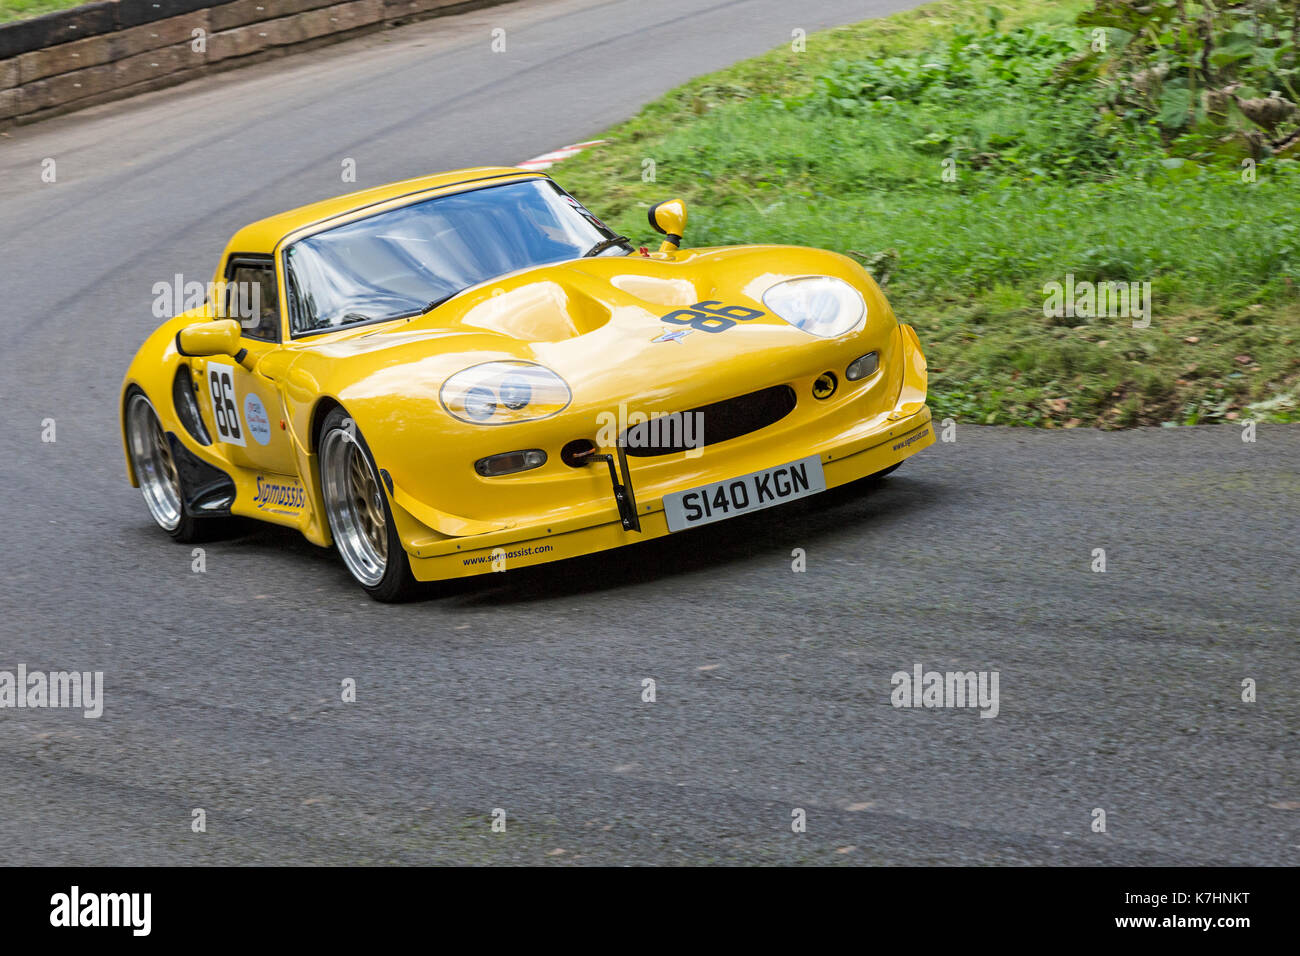 Worcestershire, UK. 16th September, 2017. A Marcos Mantis being raced by Phil Jones at the Autumn Speed Finale at Shelsley Walsh in Worcestershire, England, on Saturday 16th September. Credit: Rob Carter/Alamy Live News Stock Photo